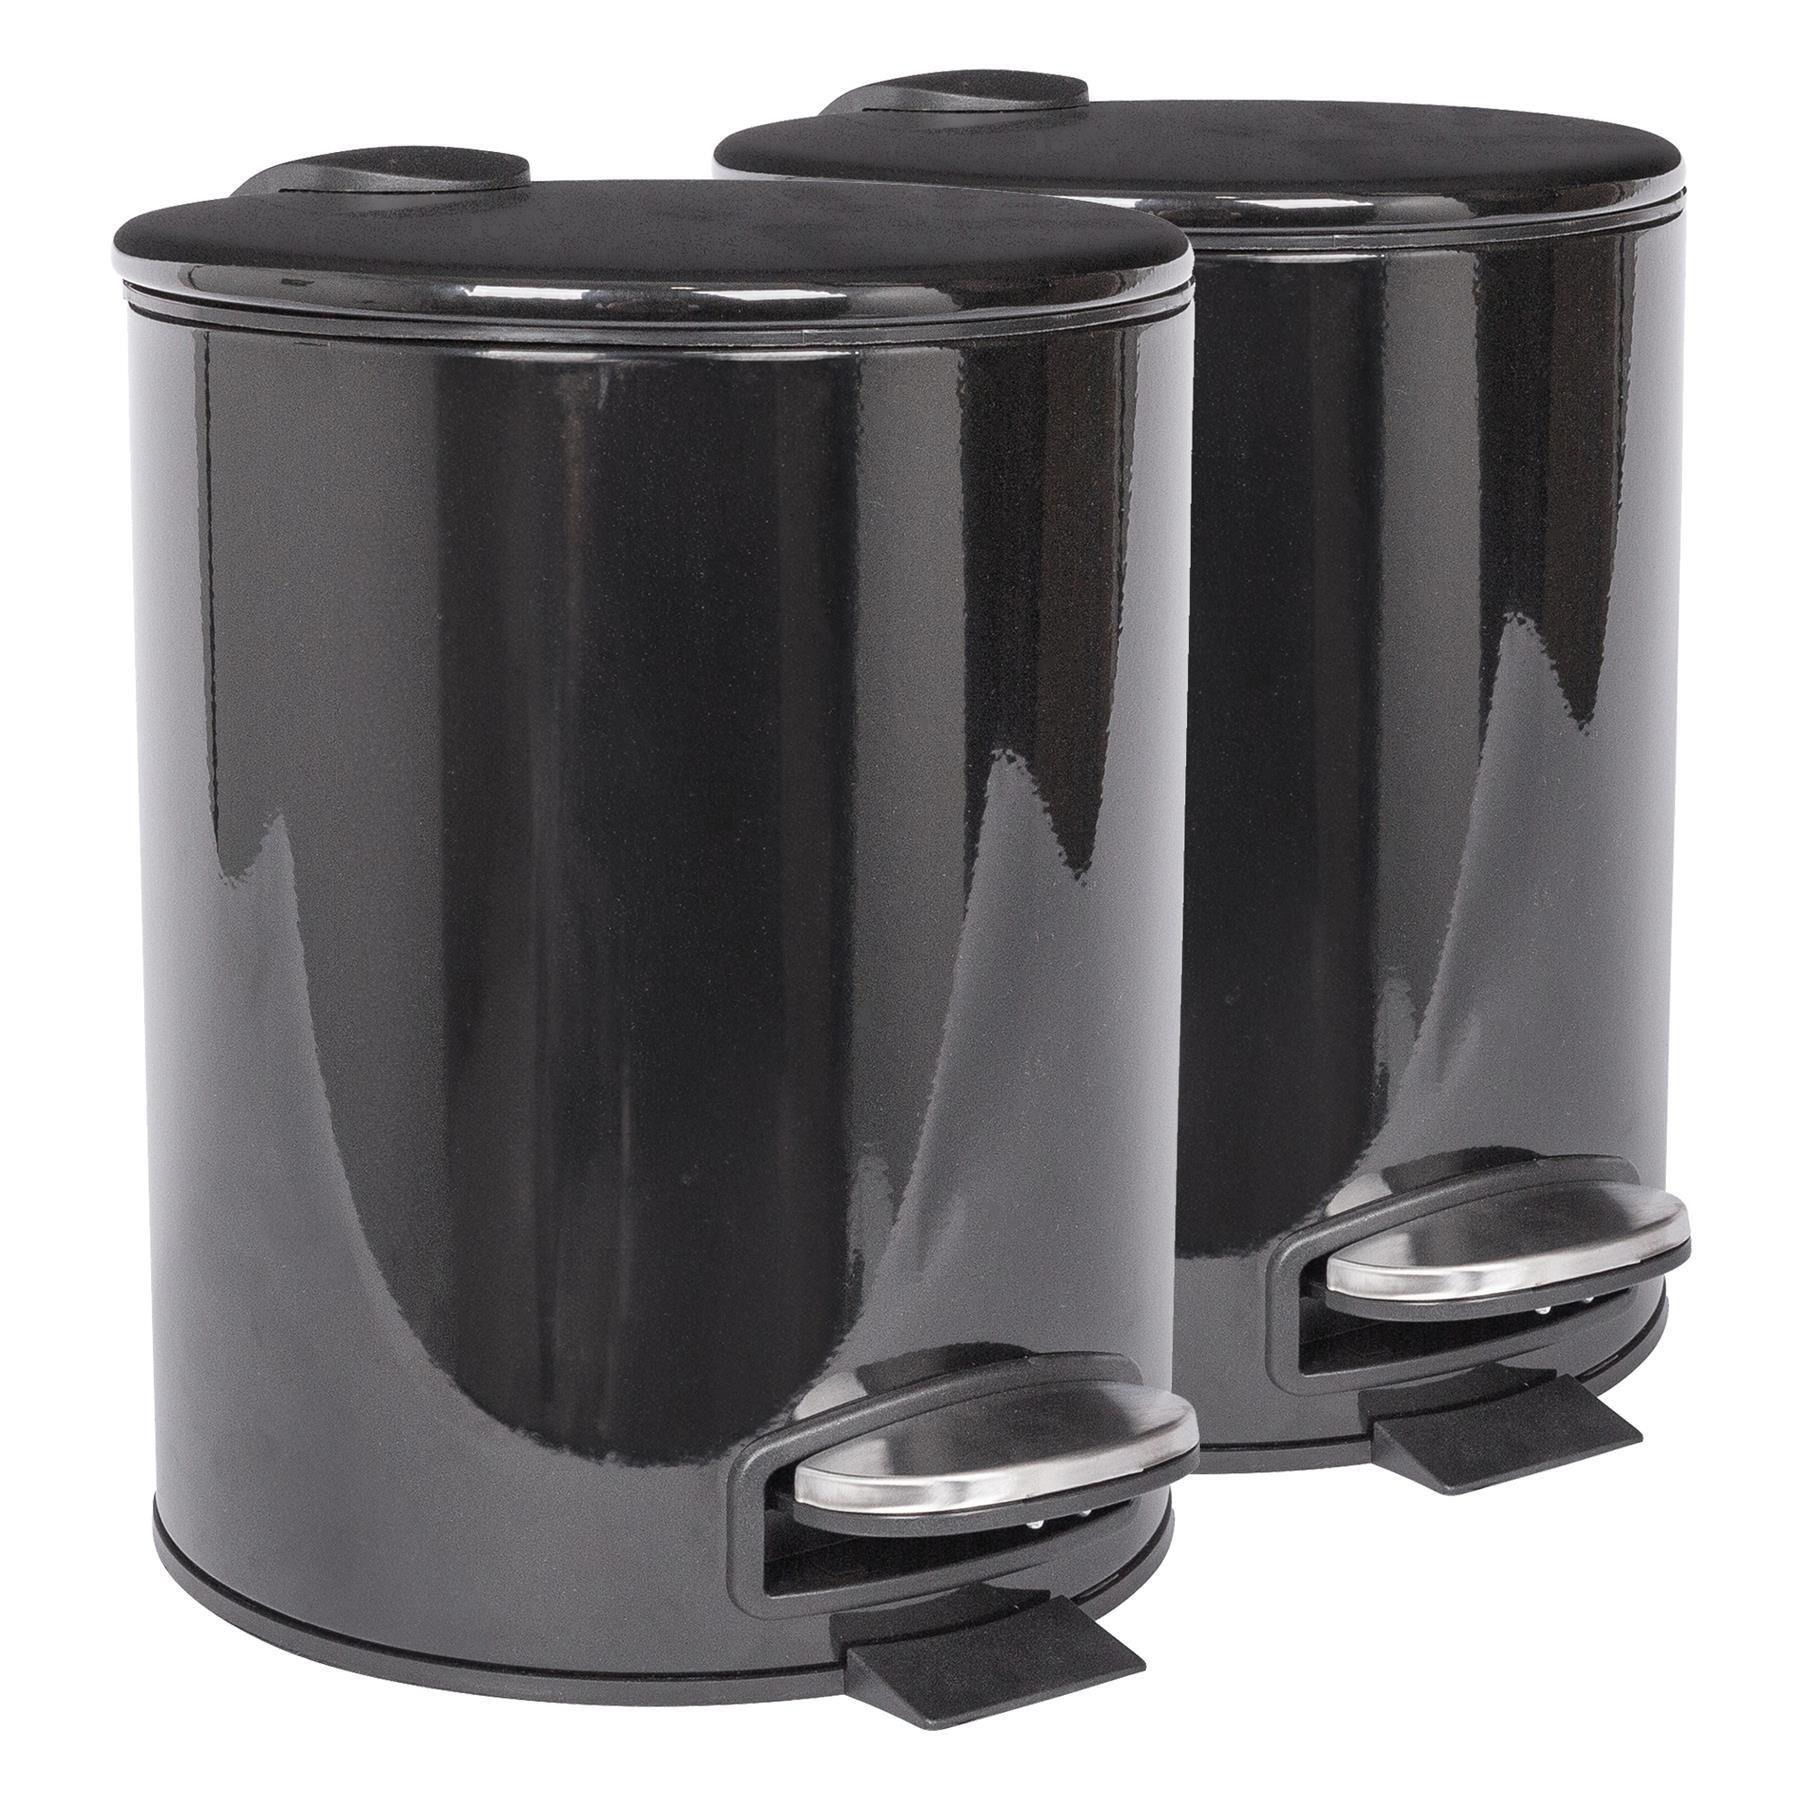 Round Stainless Steel Pedal Bins - 5L - Black - Pack of 2 - image 1